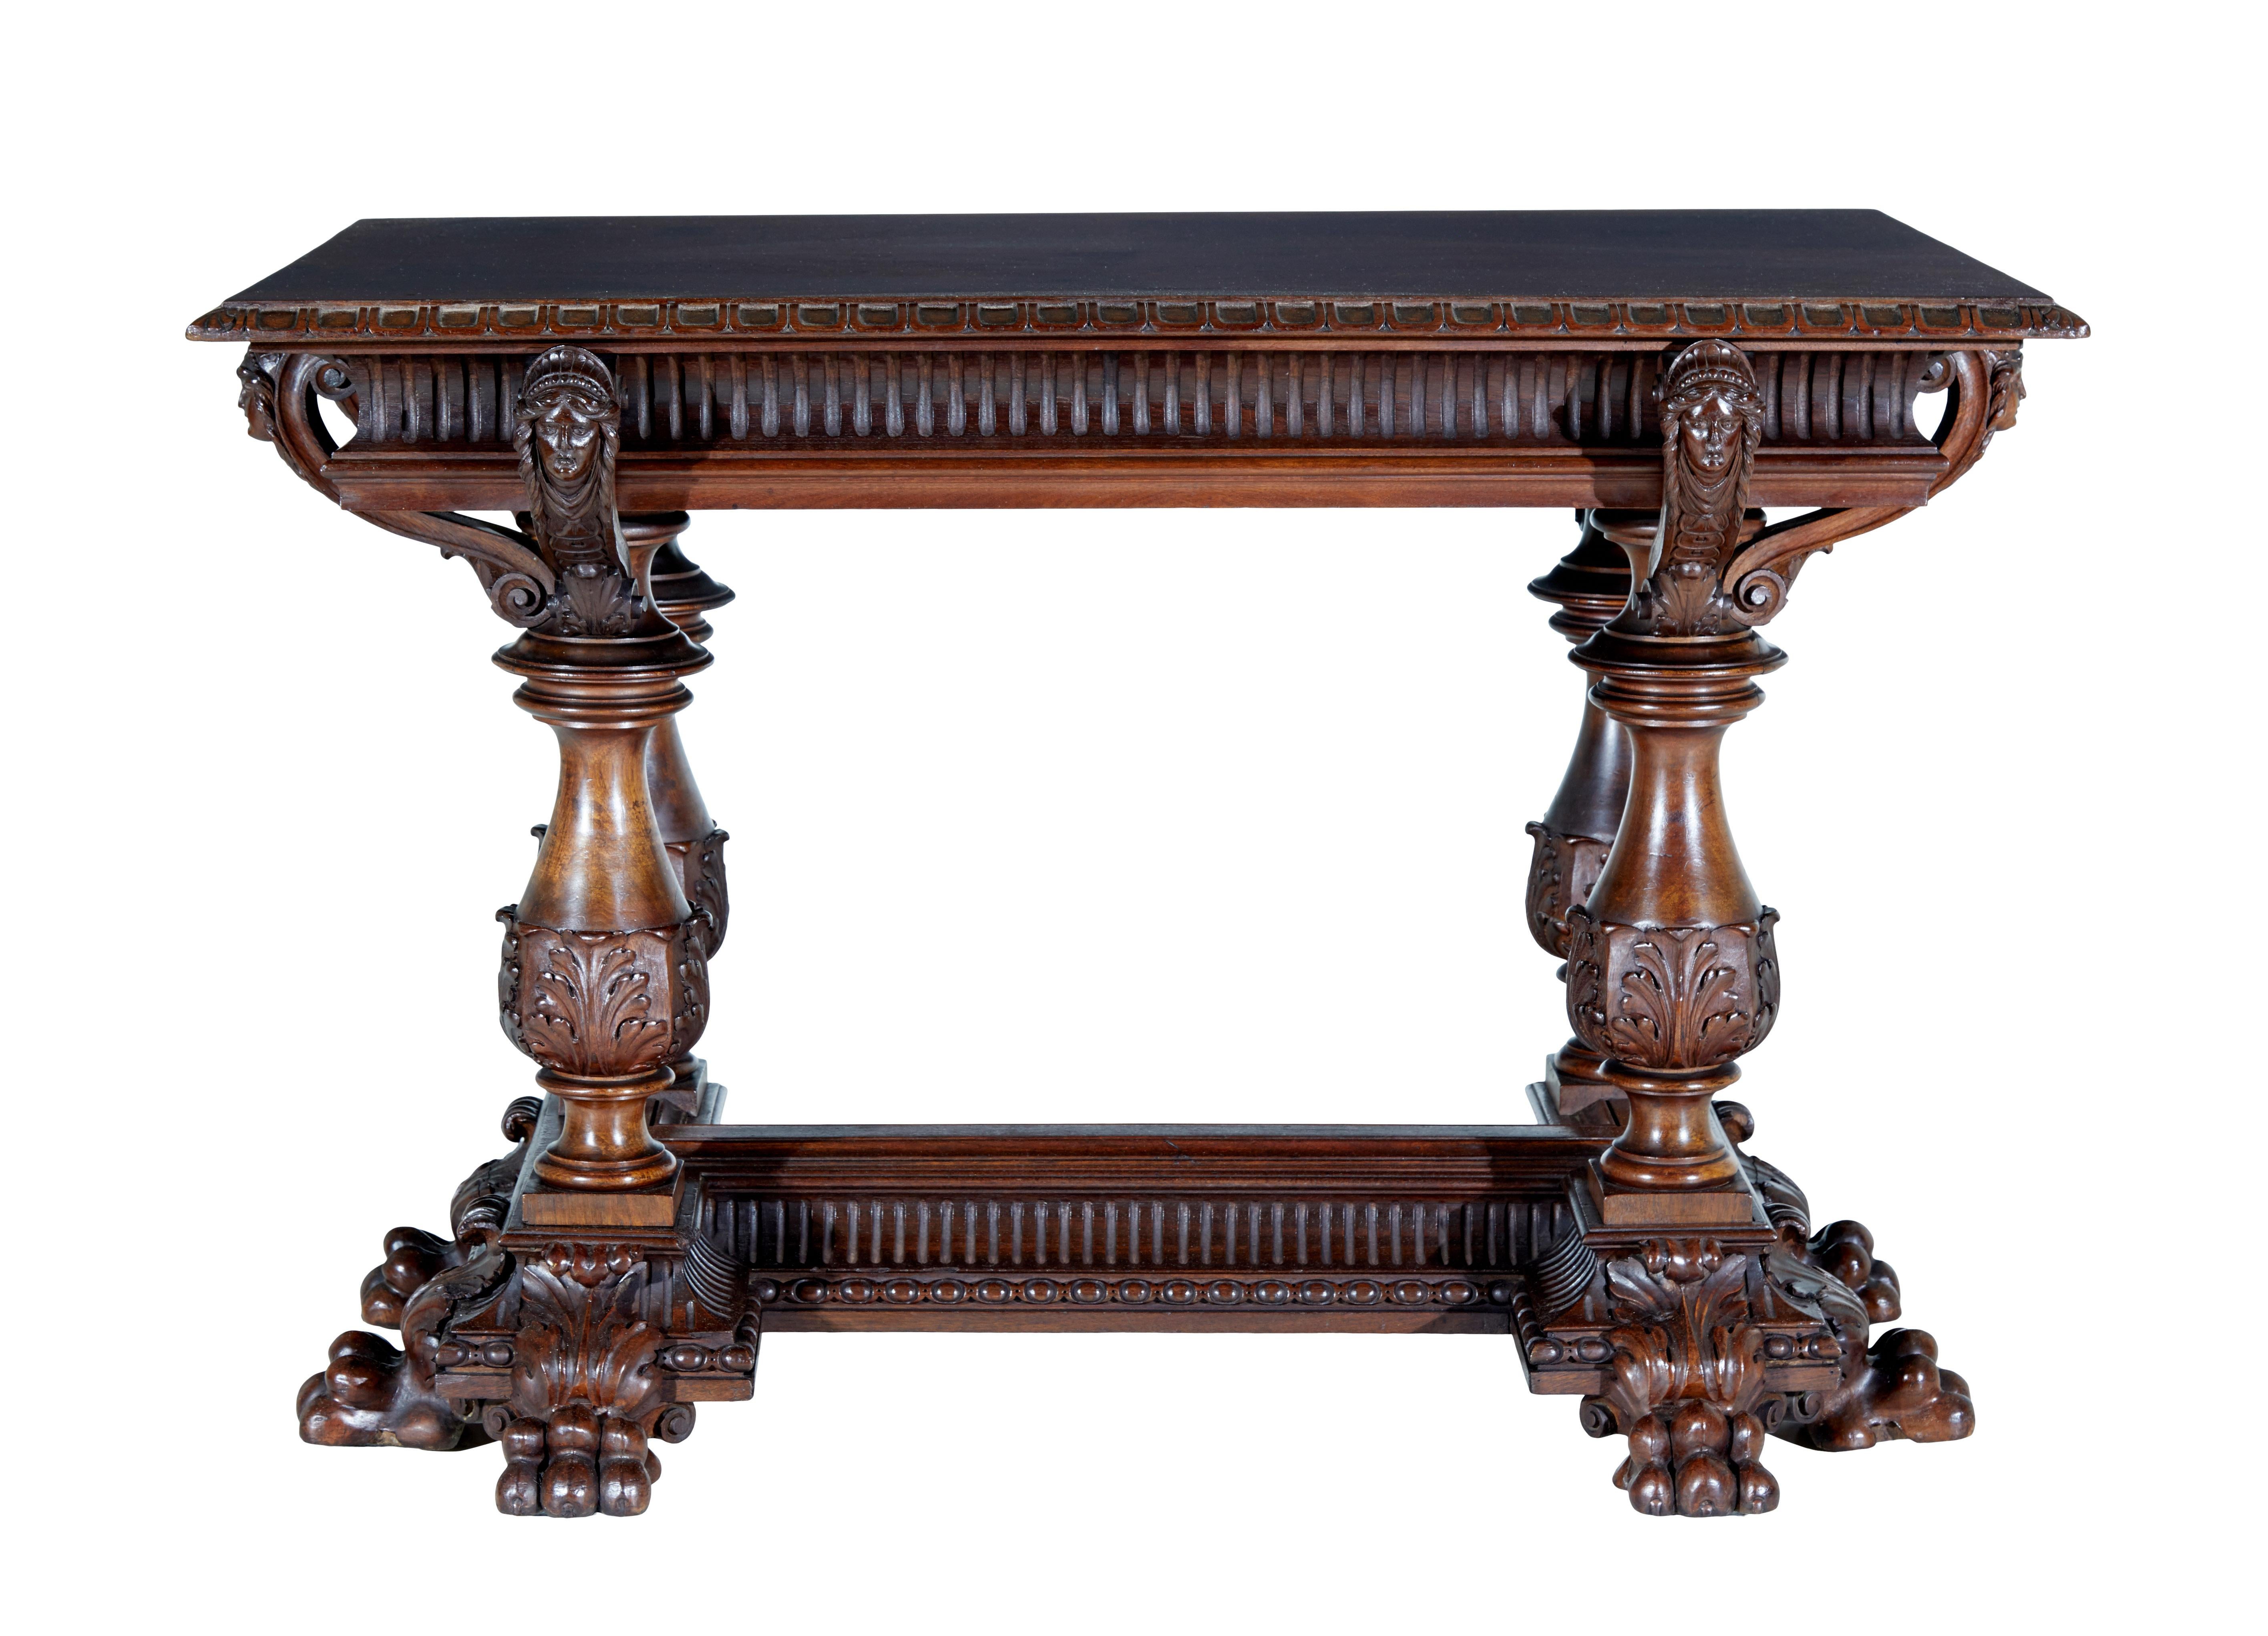 19th century Italian carved walnut center table circa 1870.

Profusely carved walnut table of the finest quality.  This table could function in multiple roles around the home, such as a desk, library, center or hall table.

Rectangular top with